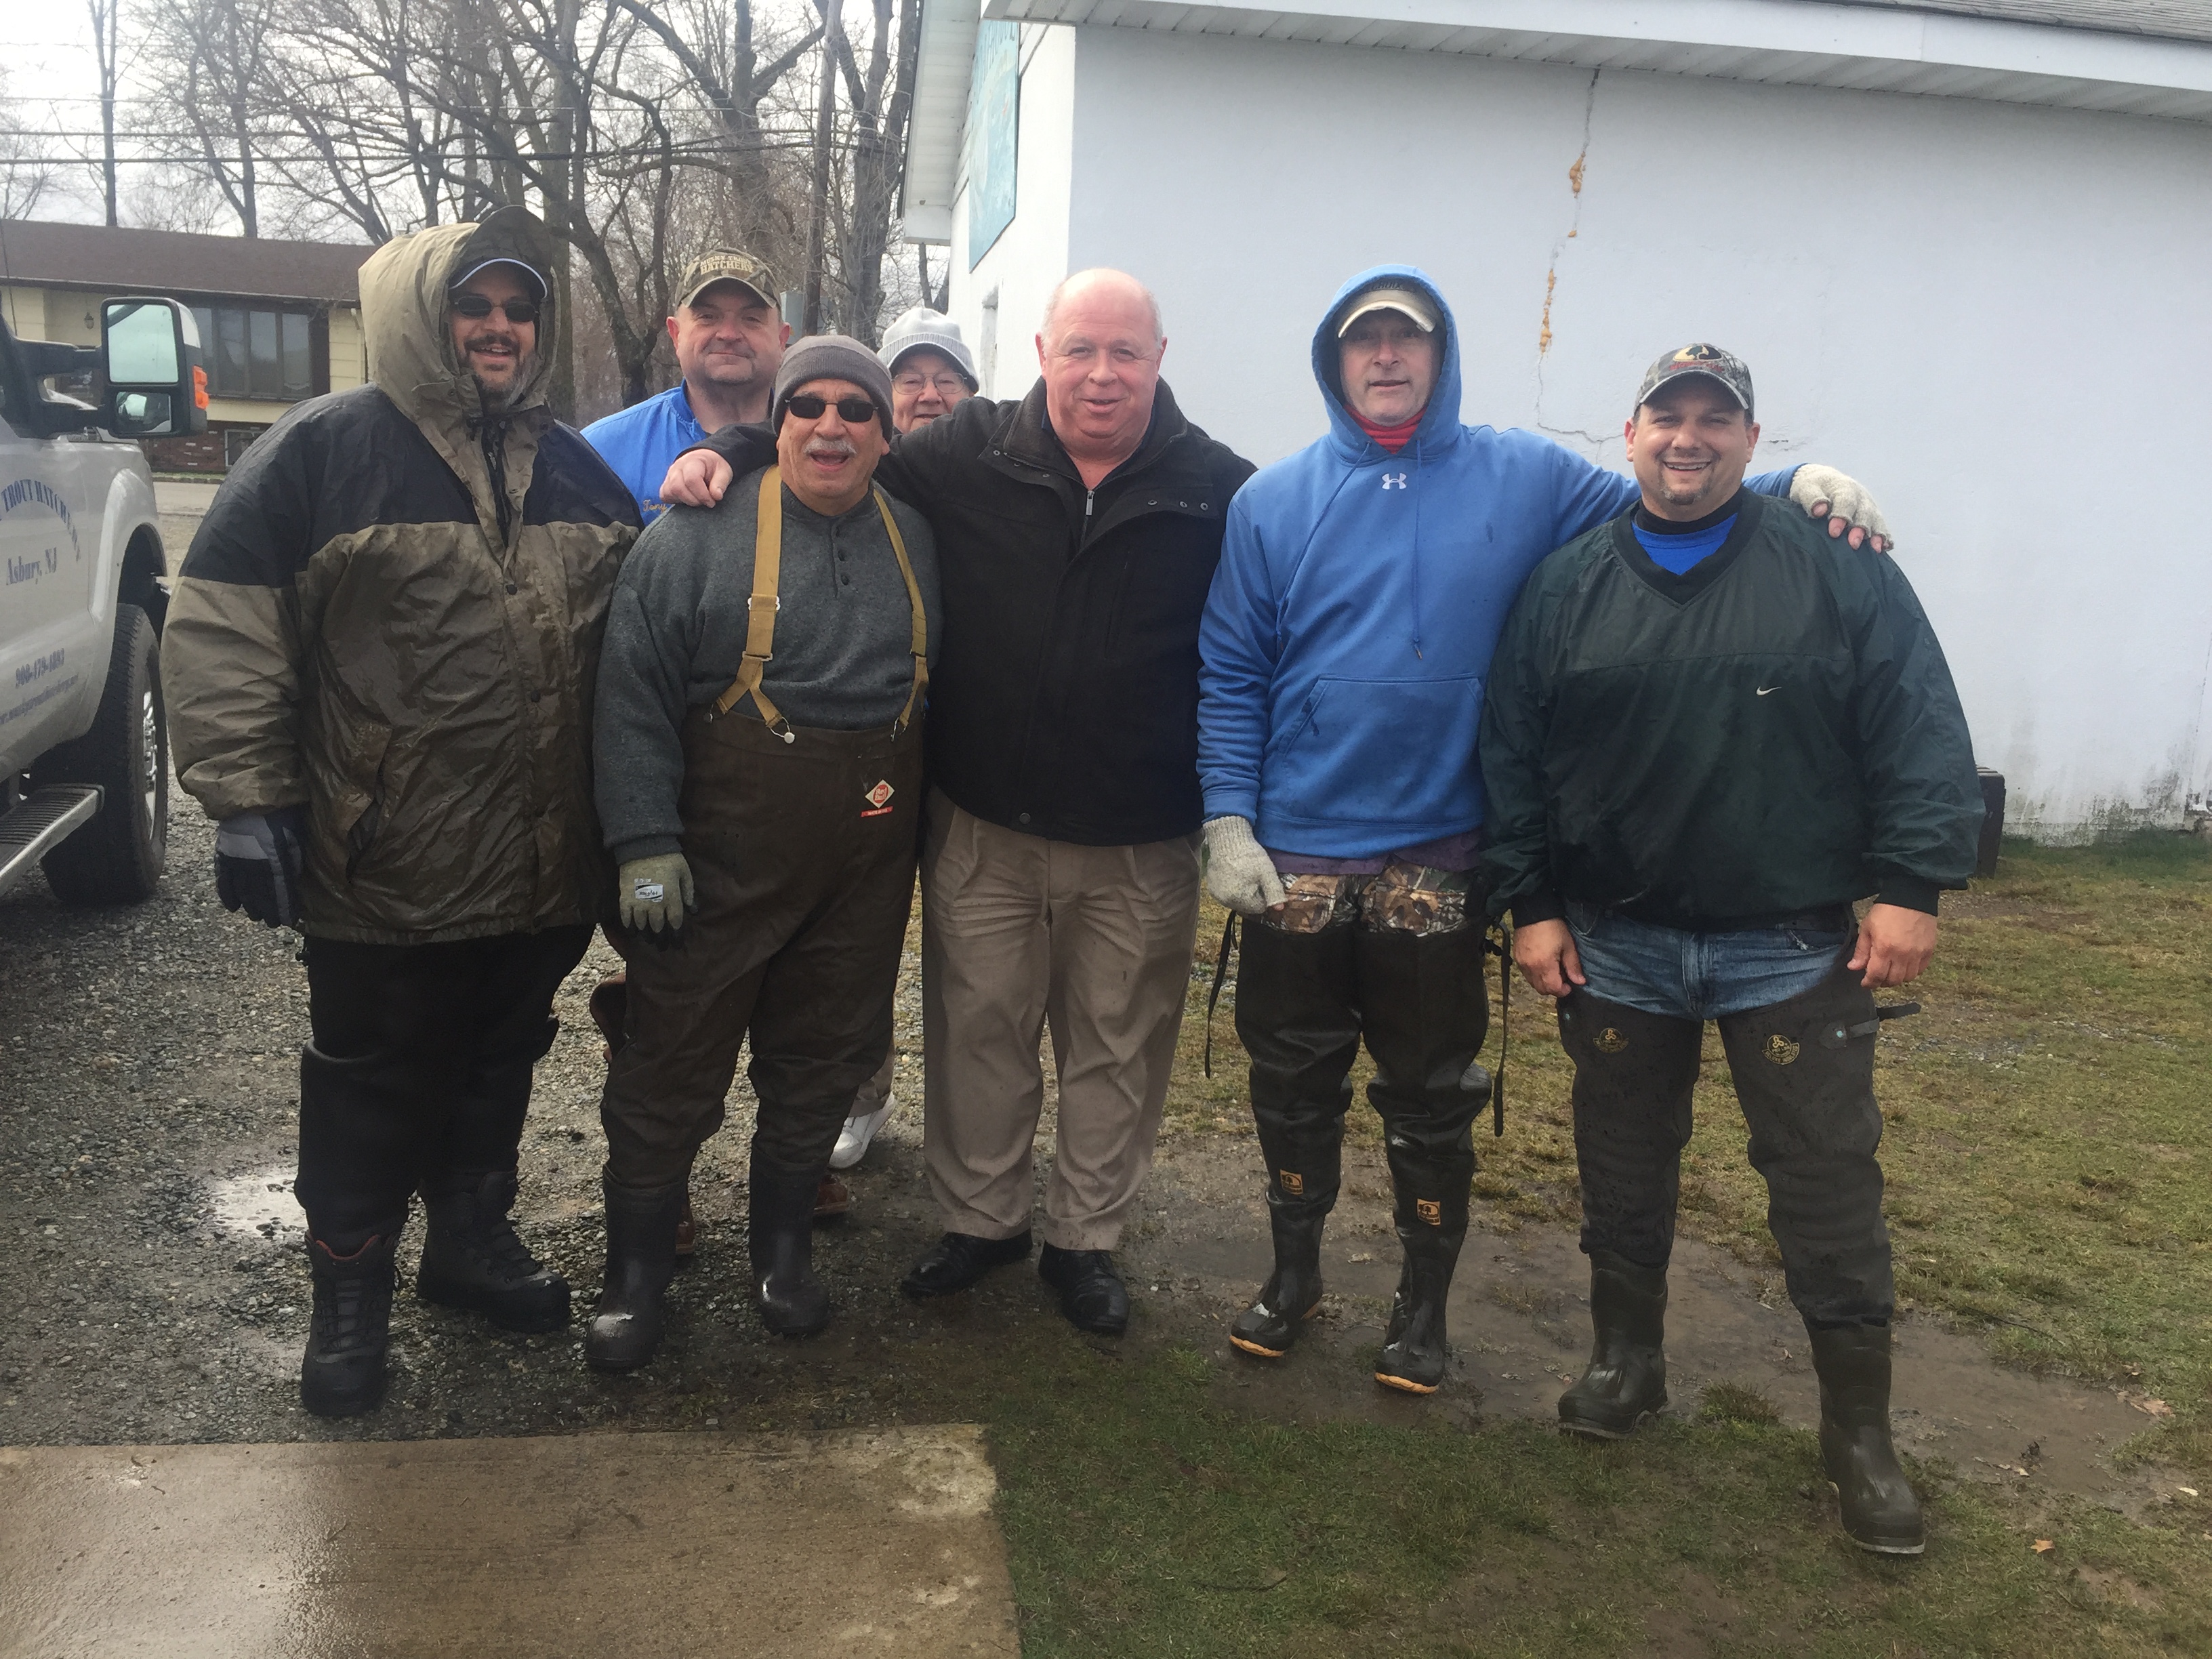 Lake Parsippany Fishing Club Holds its Annual "Trout Stocking Day"